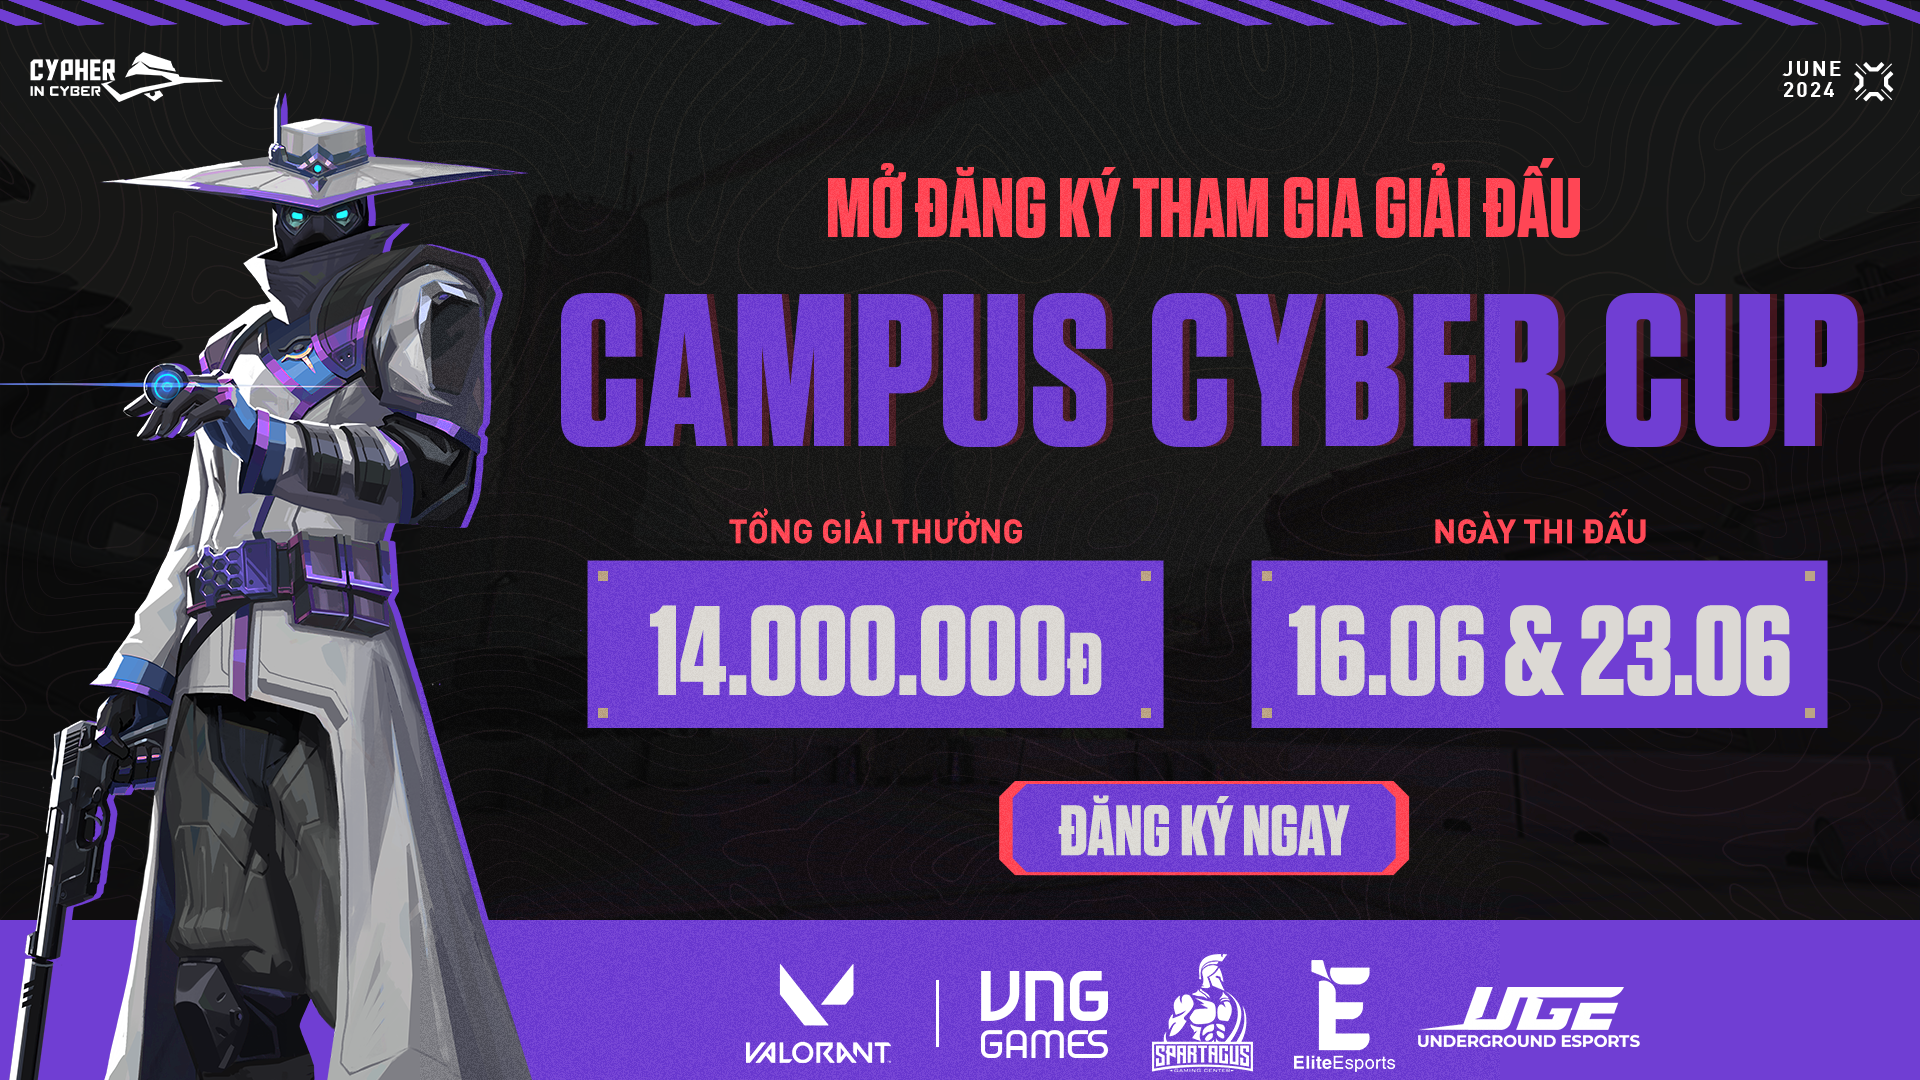 [CYPHER IN CYBER] CAMPUS CYBER CUP THANG 6